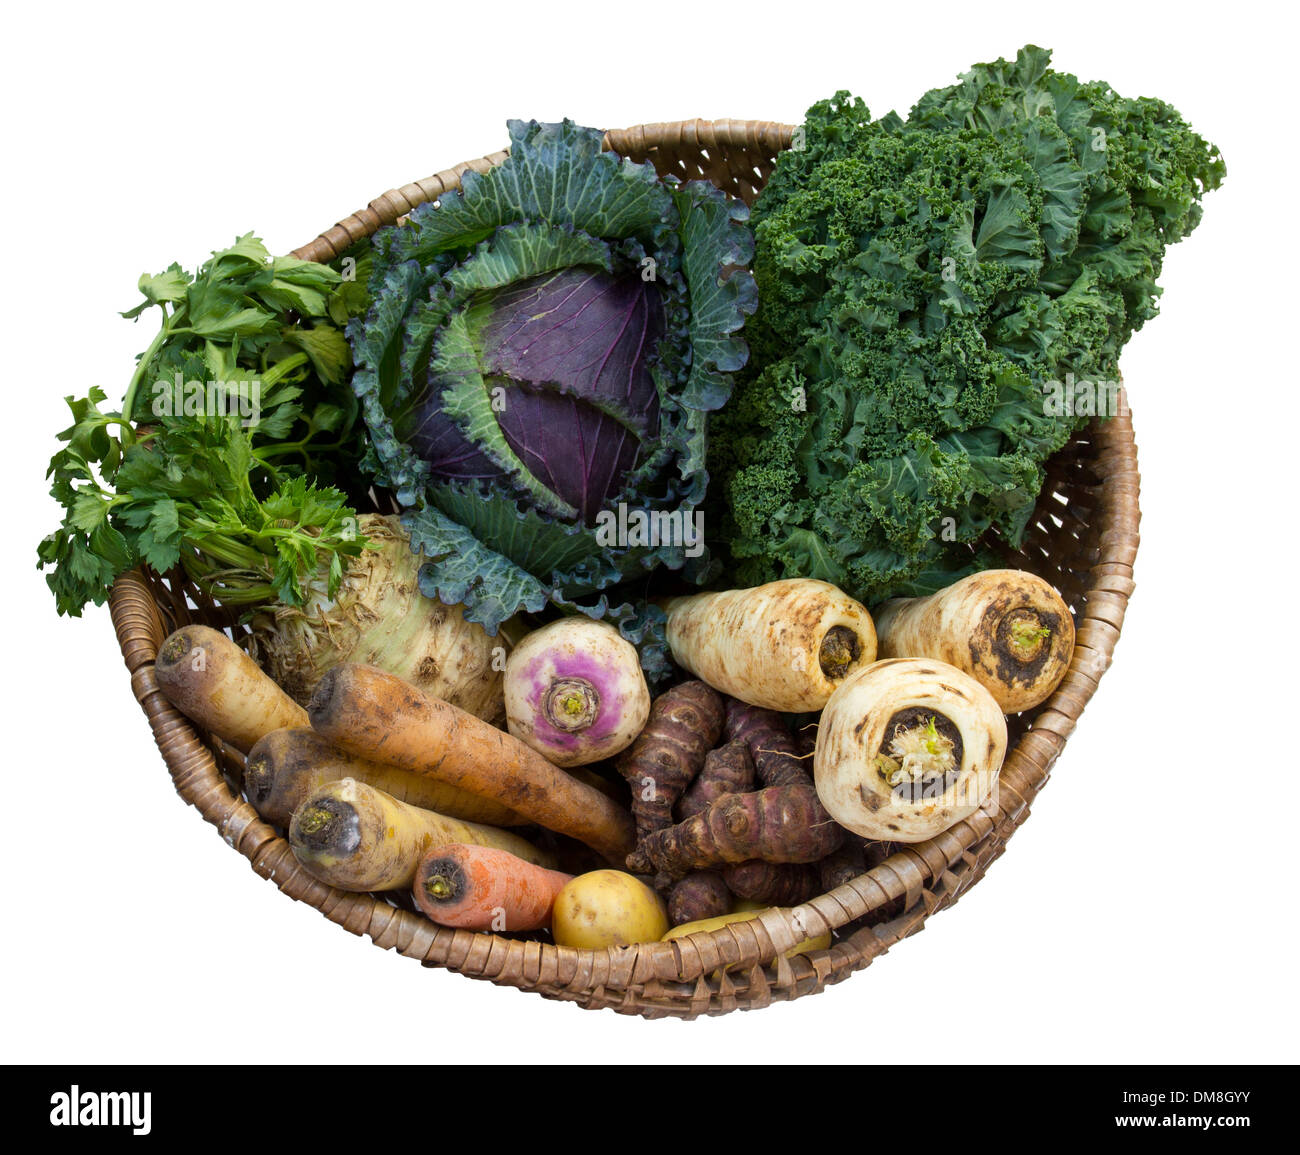 Root vegetables and brassicas in a wicker basket on a white surface Stock Photo